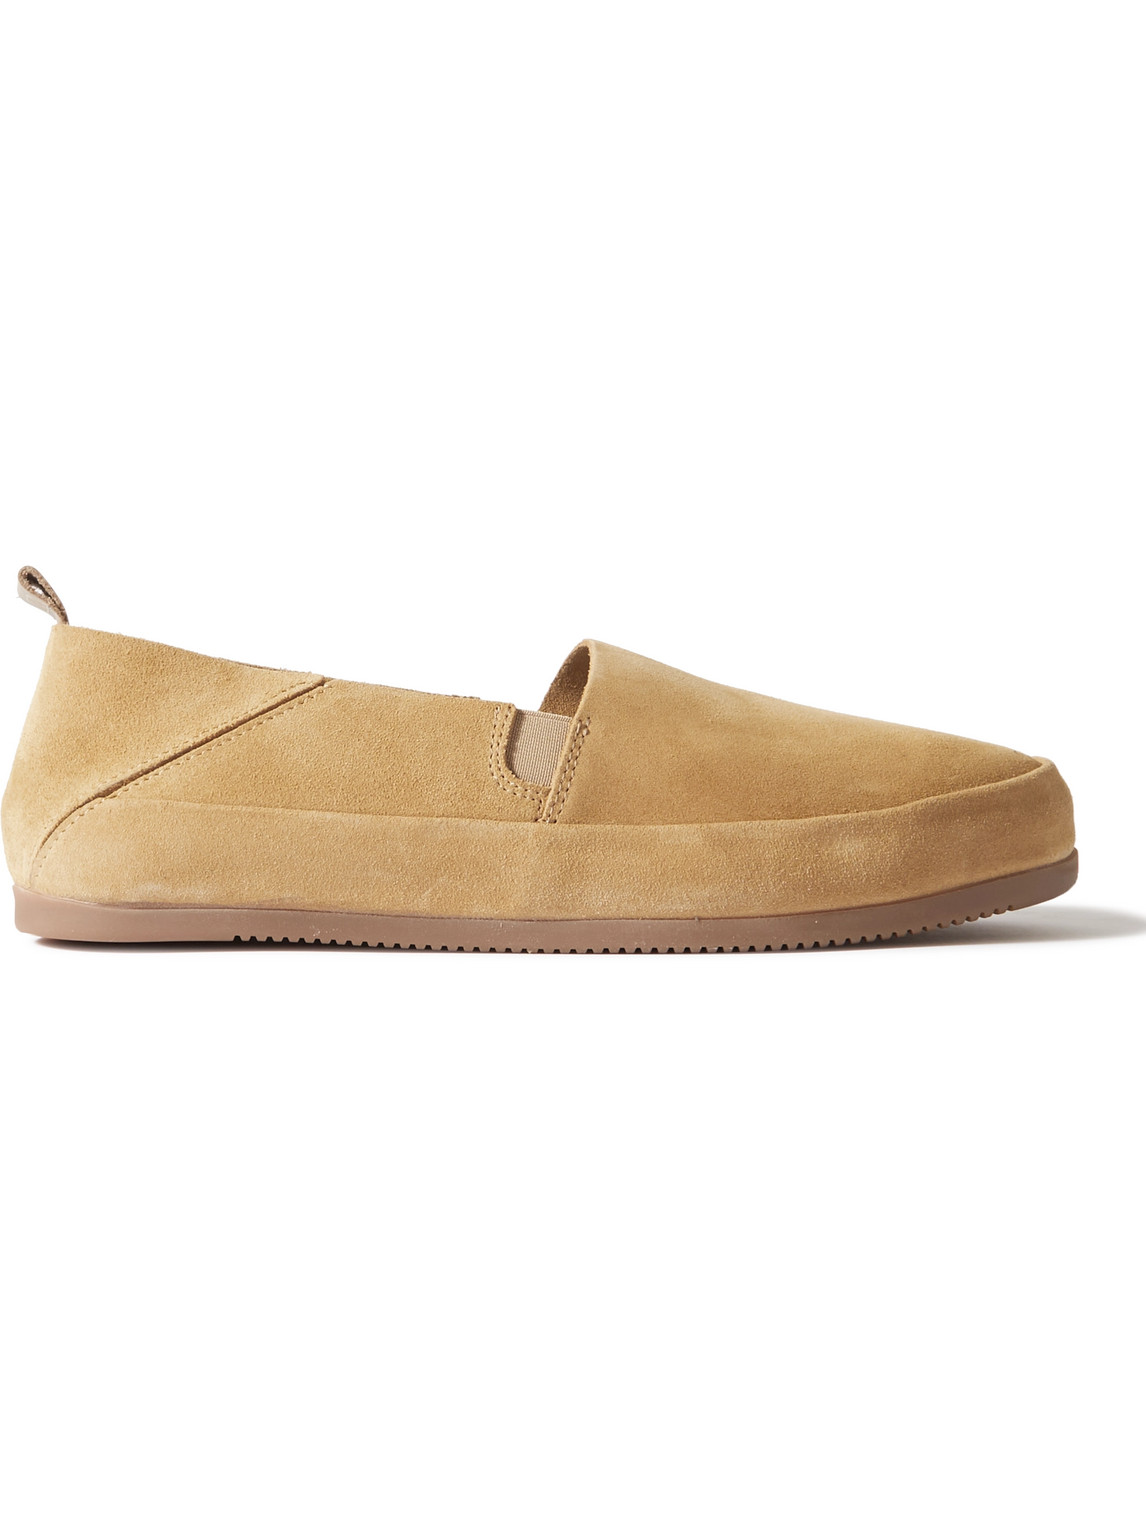 Collapsible-Heel Suede Loafers